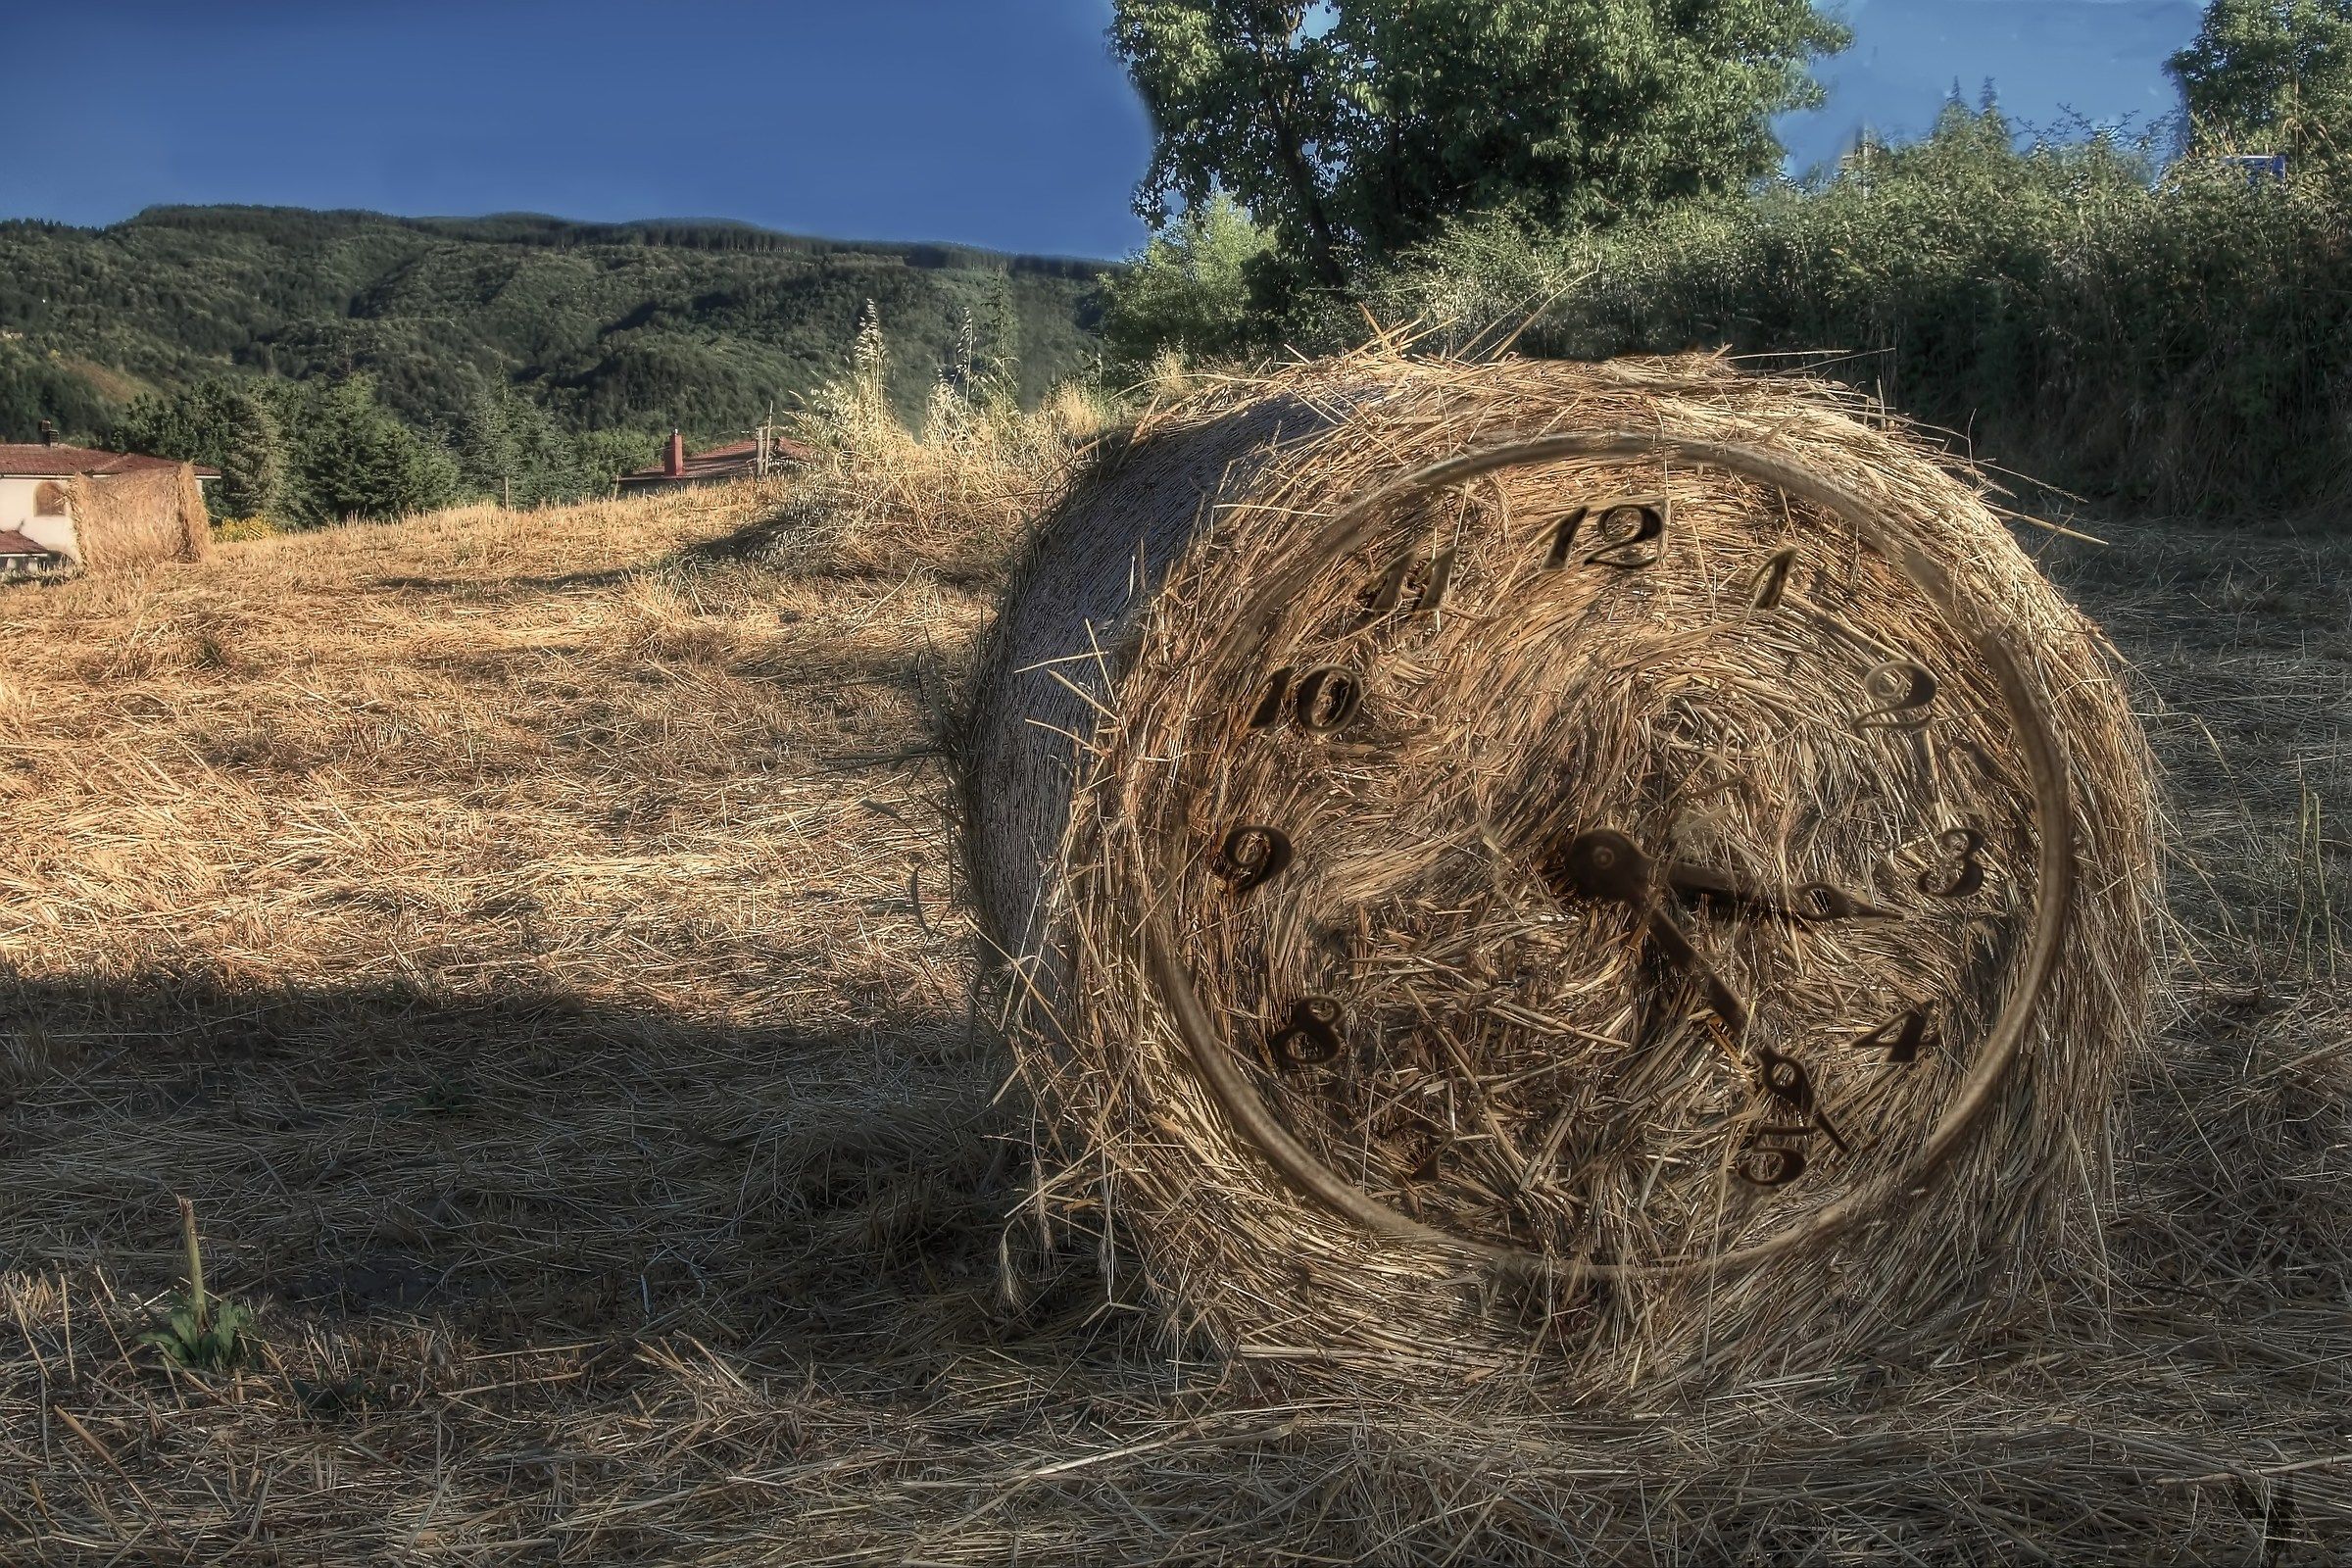 and 'the time of harvest - HDR...